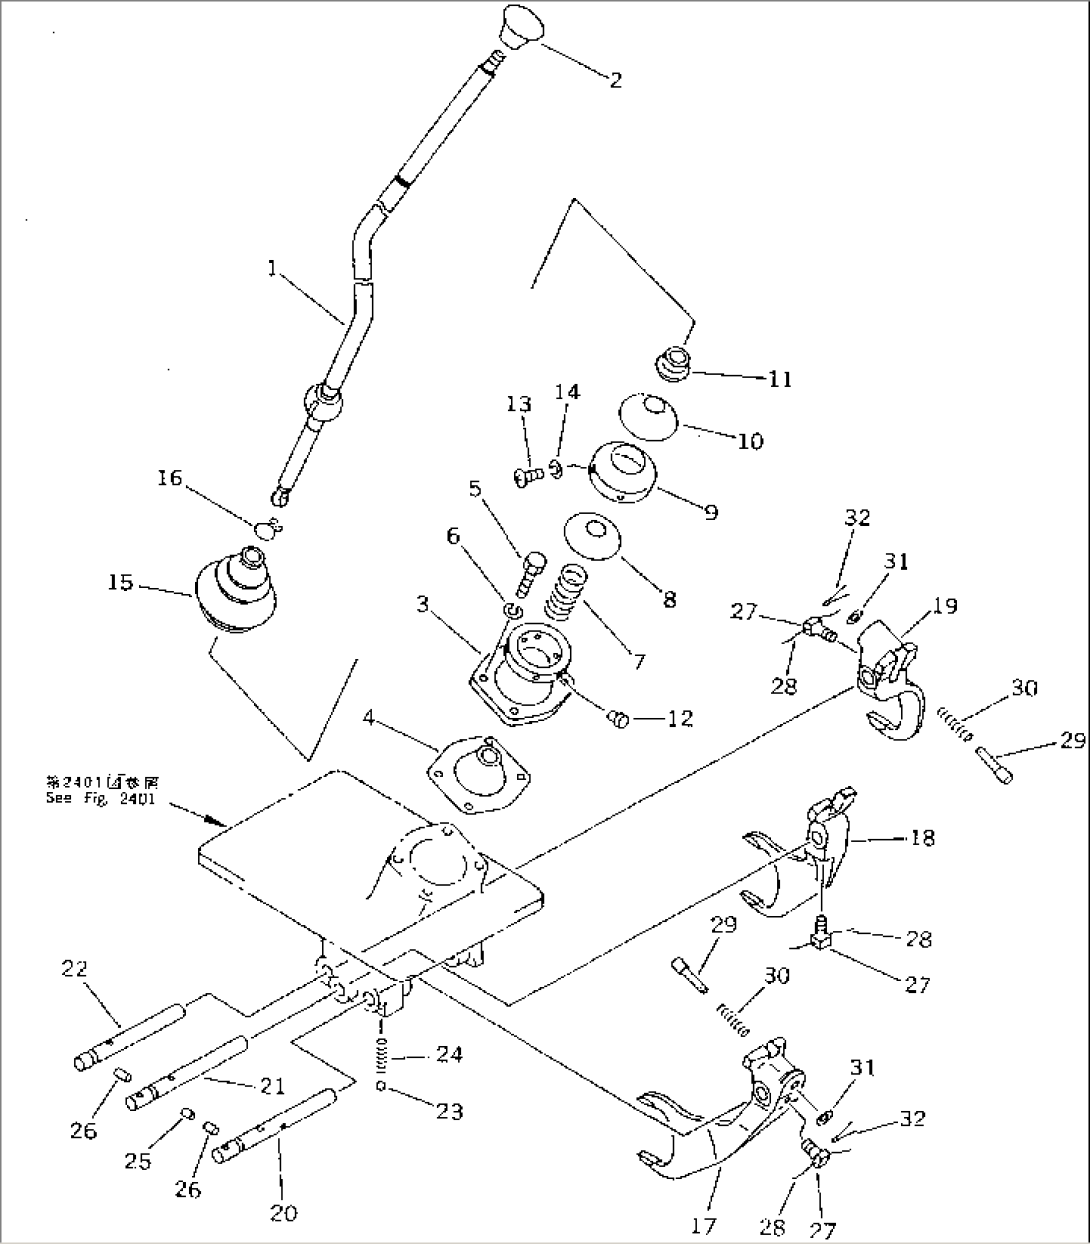 TRANSMISSION (SHIFT LEVER AND FORK) (5/5)(WIHTOUT BACK-UP SWITCH)